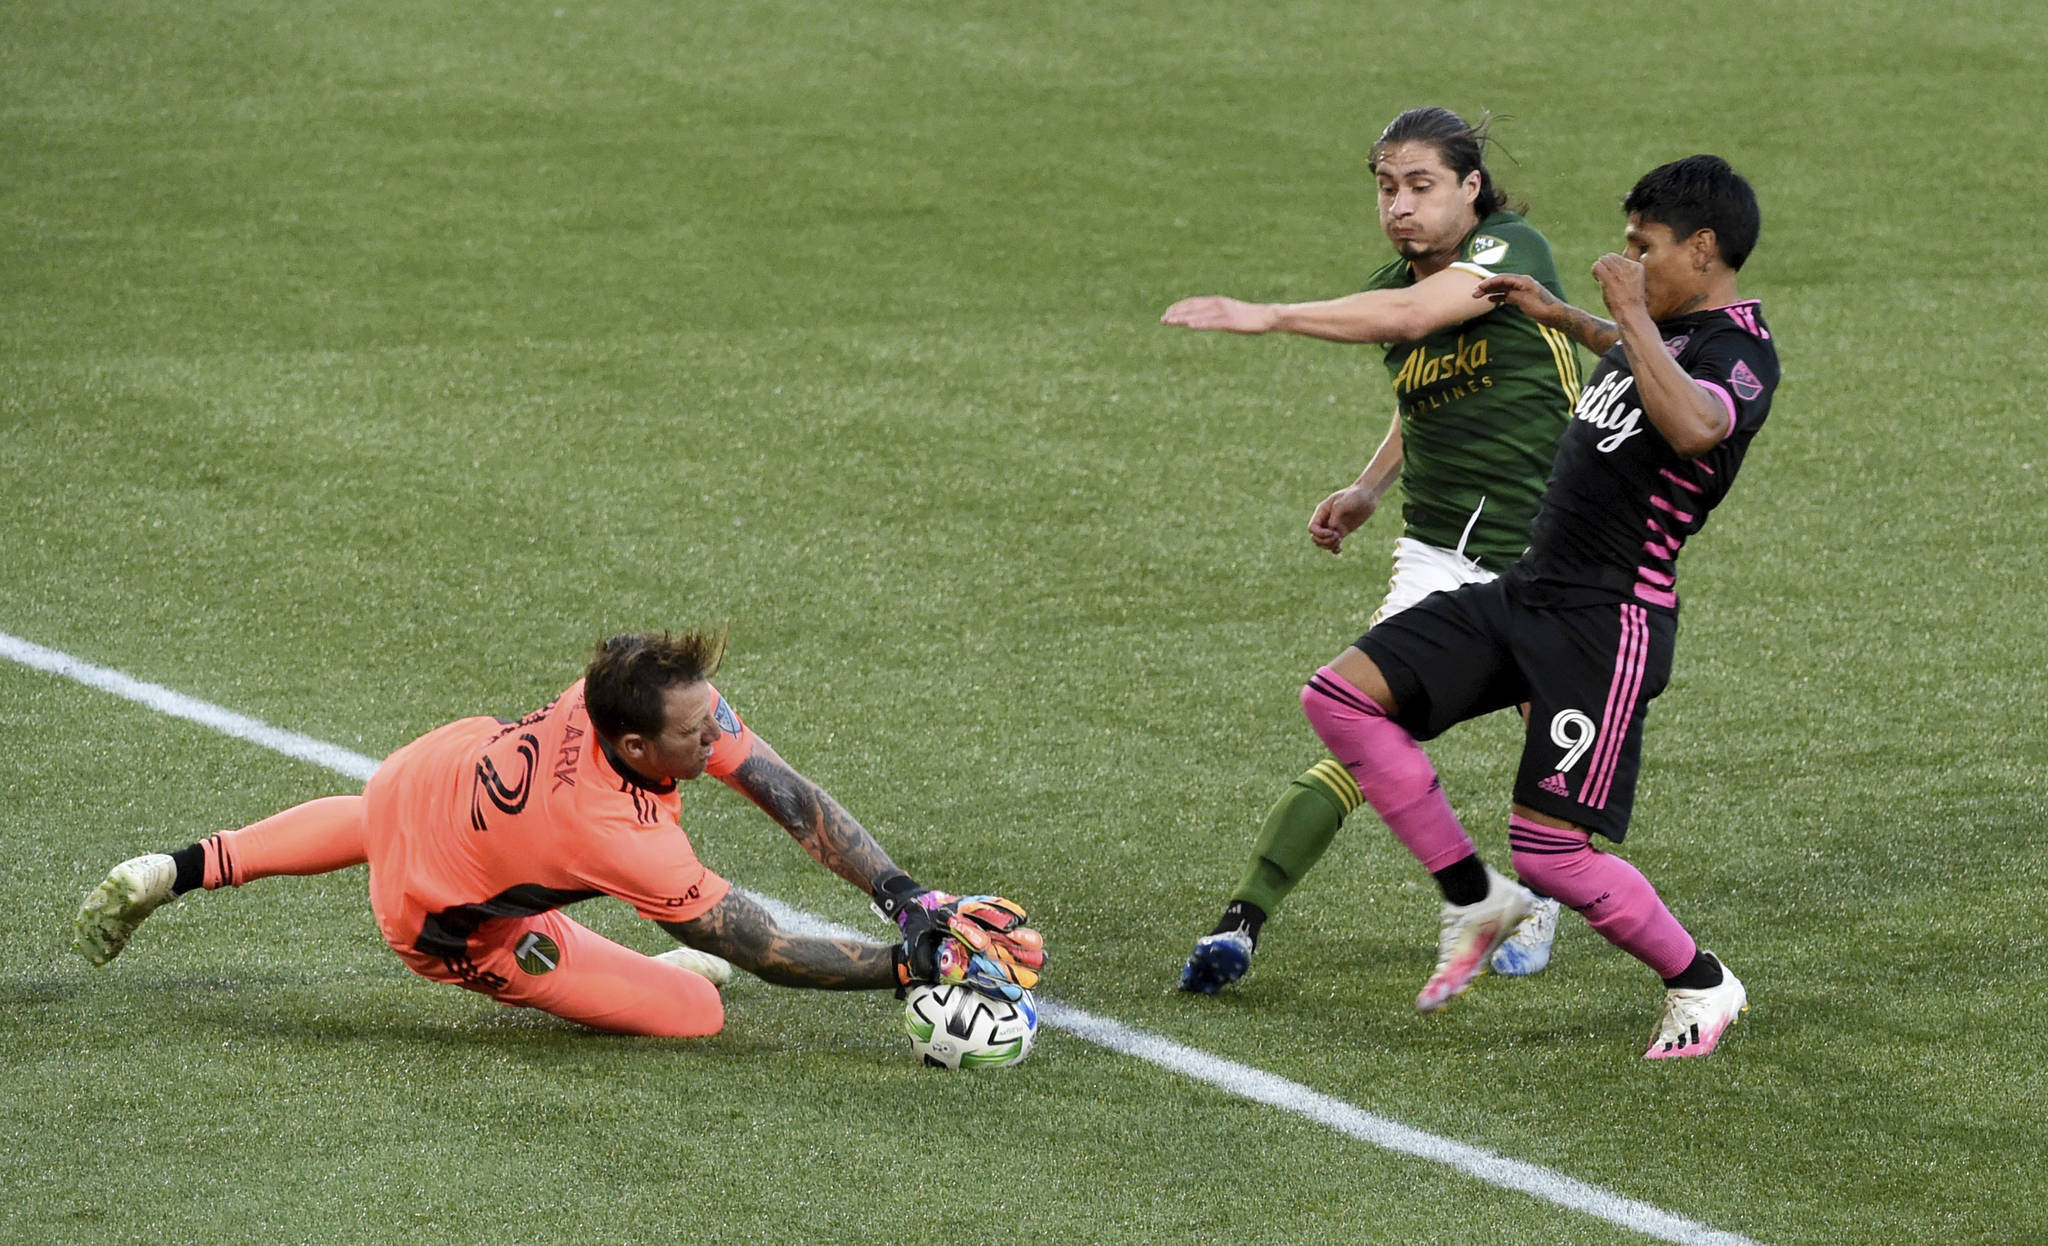 Portland Timbers goalkeeper Steve Clark, left, blocks the shot of Seattle Sounders forward Raul Ruidiaz, right, as Portland Timbers’ Jorge Villafana, center, defends during the first half of an MLS soccer match in Portland, Ore., Sunday, Aug. 23, 2020. (AP Photo/Steve Dykes)